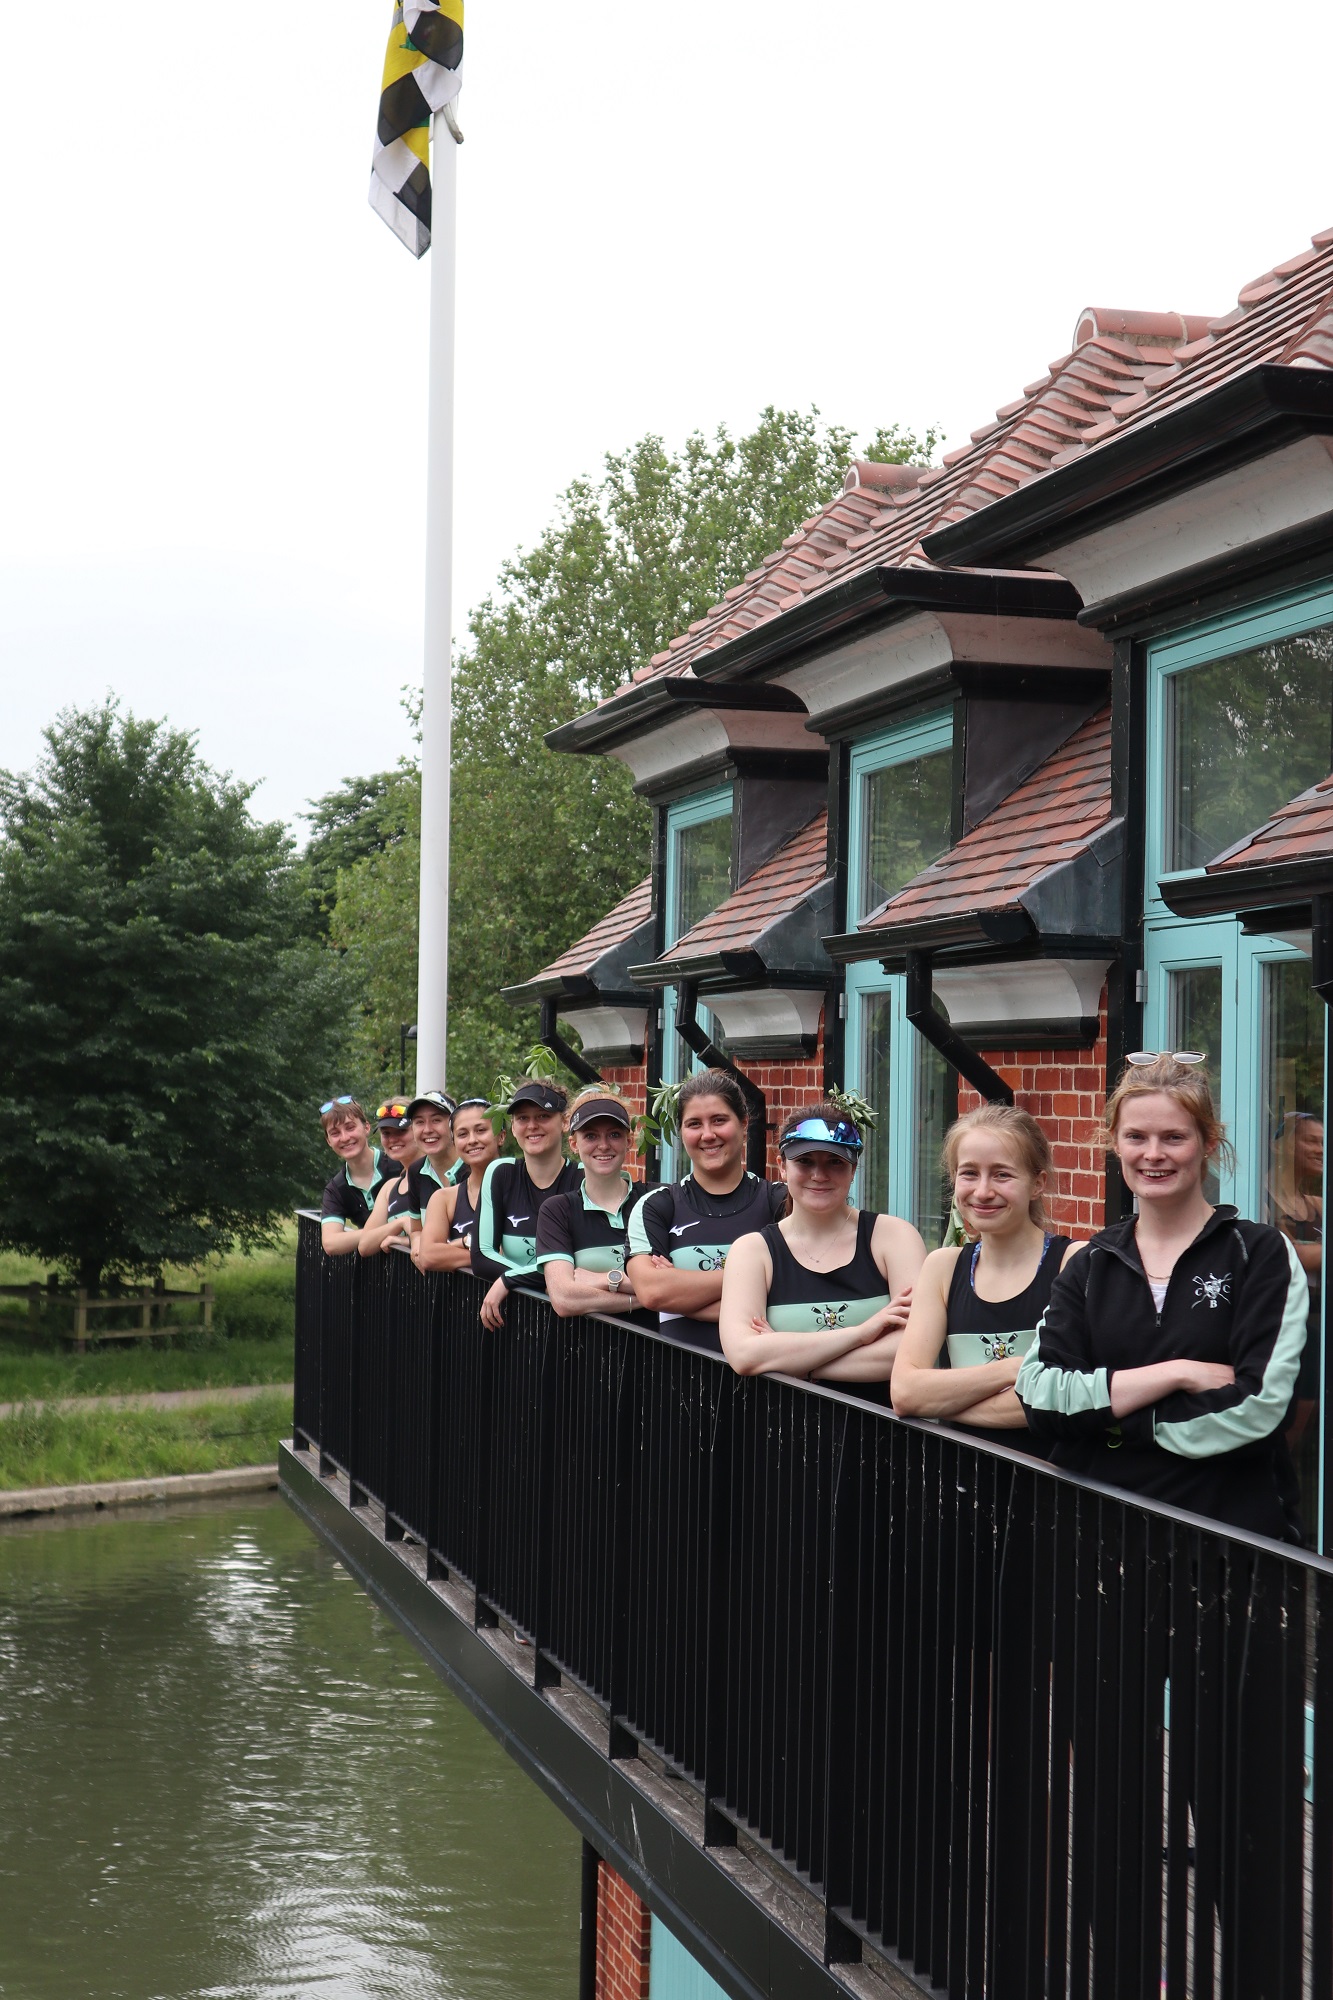 Caius women's 1 crew posing on the balcony at the Boat House